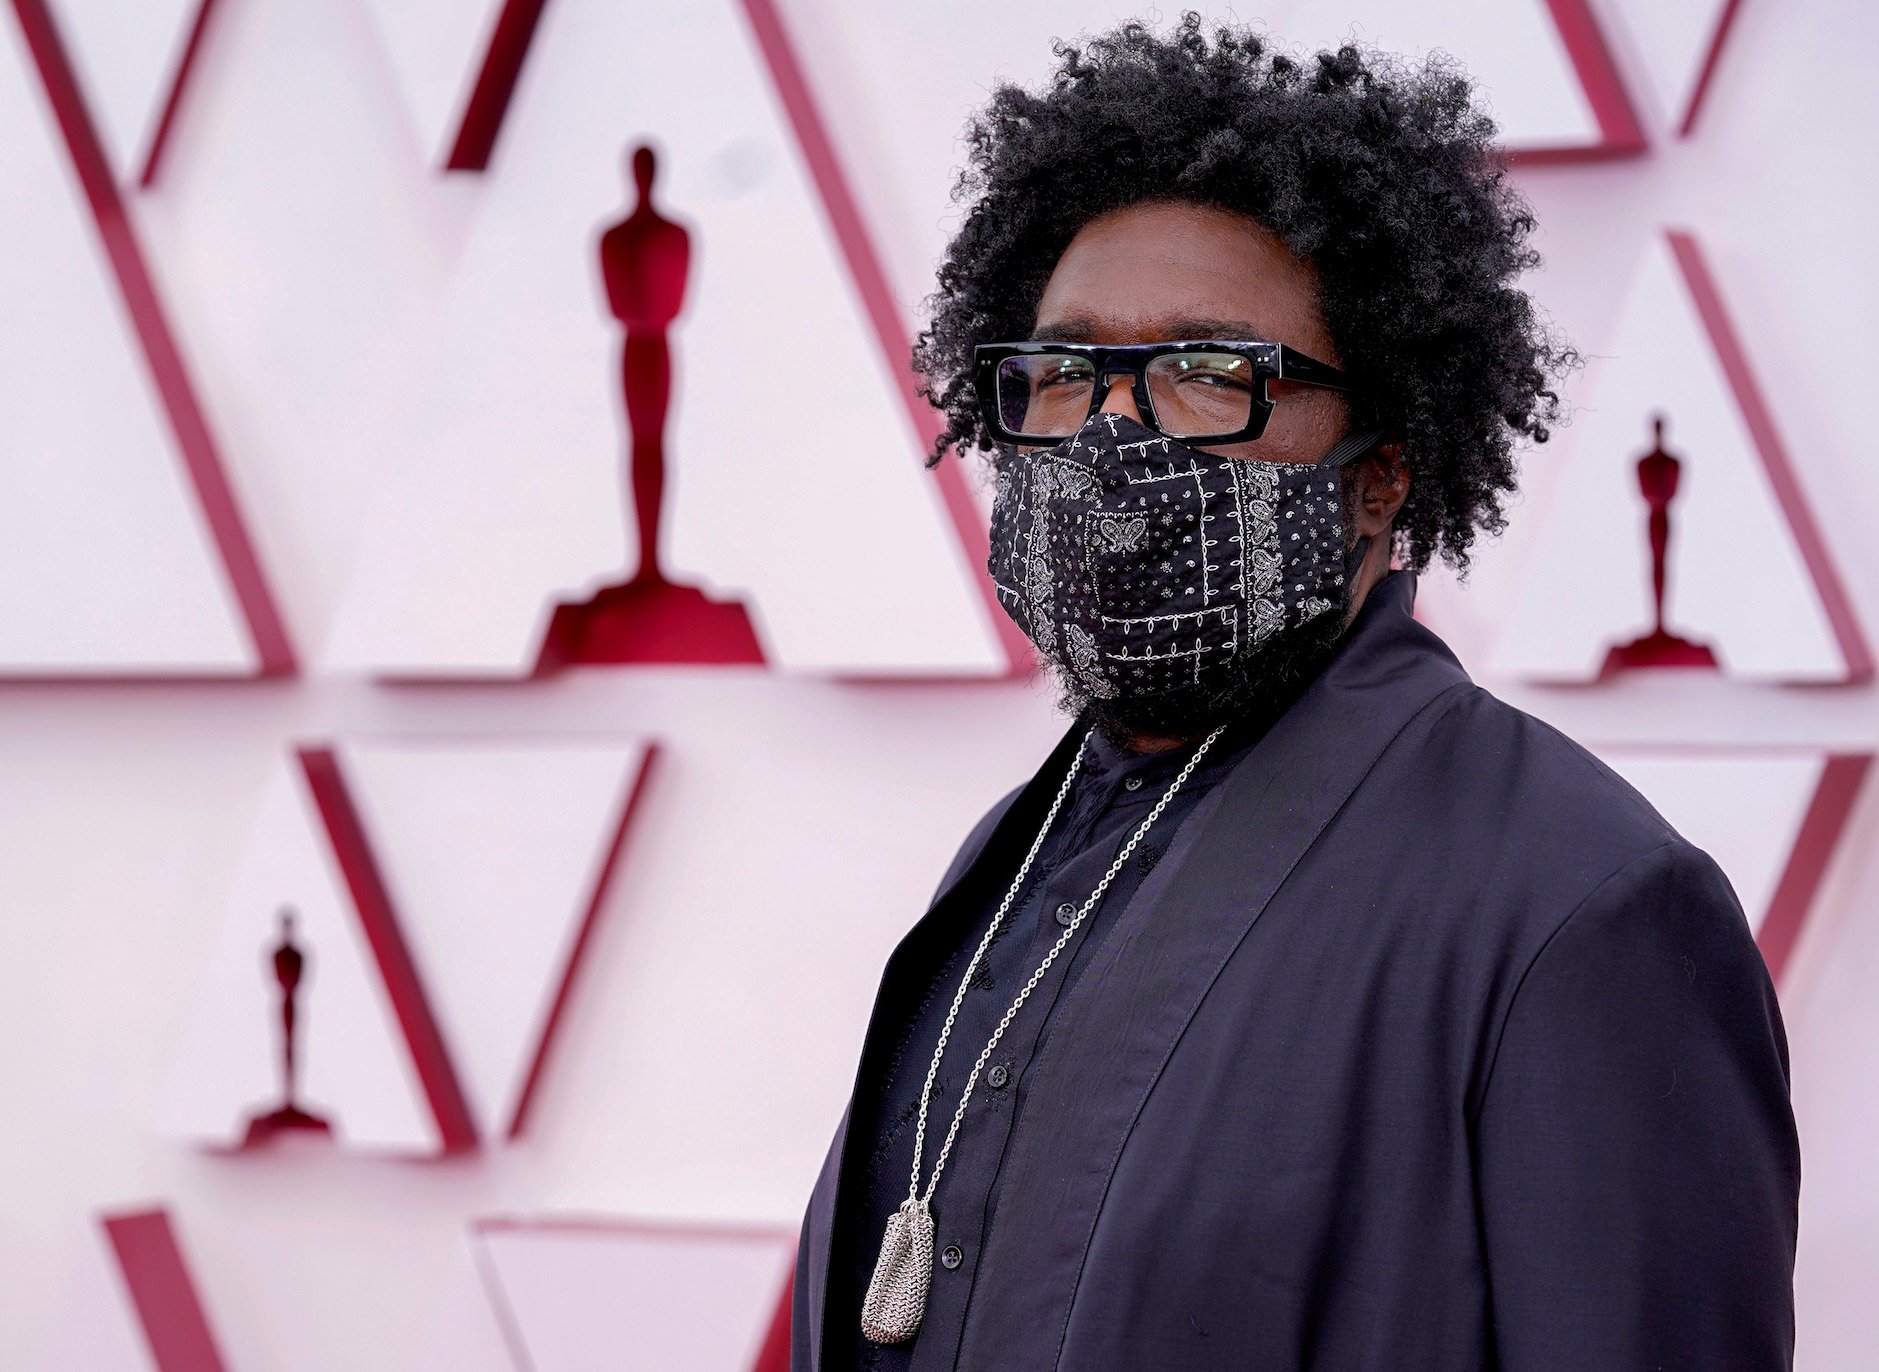 Questlove, one of the best dressed at the Oscars in 2021, wearing a mask and a black suit with a gold chain on the red carpet